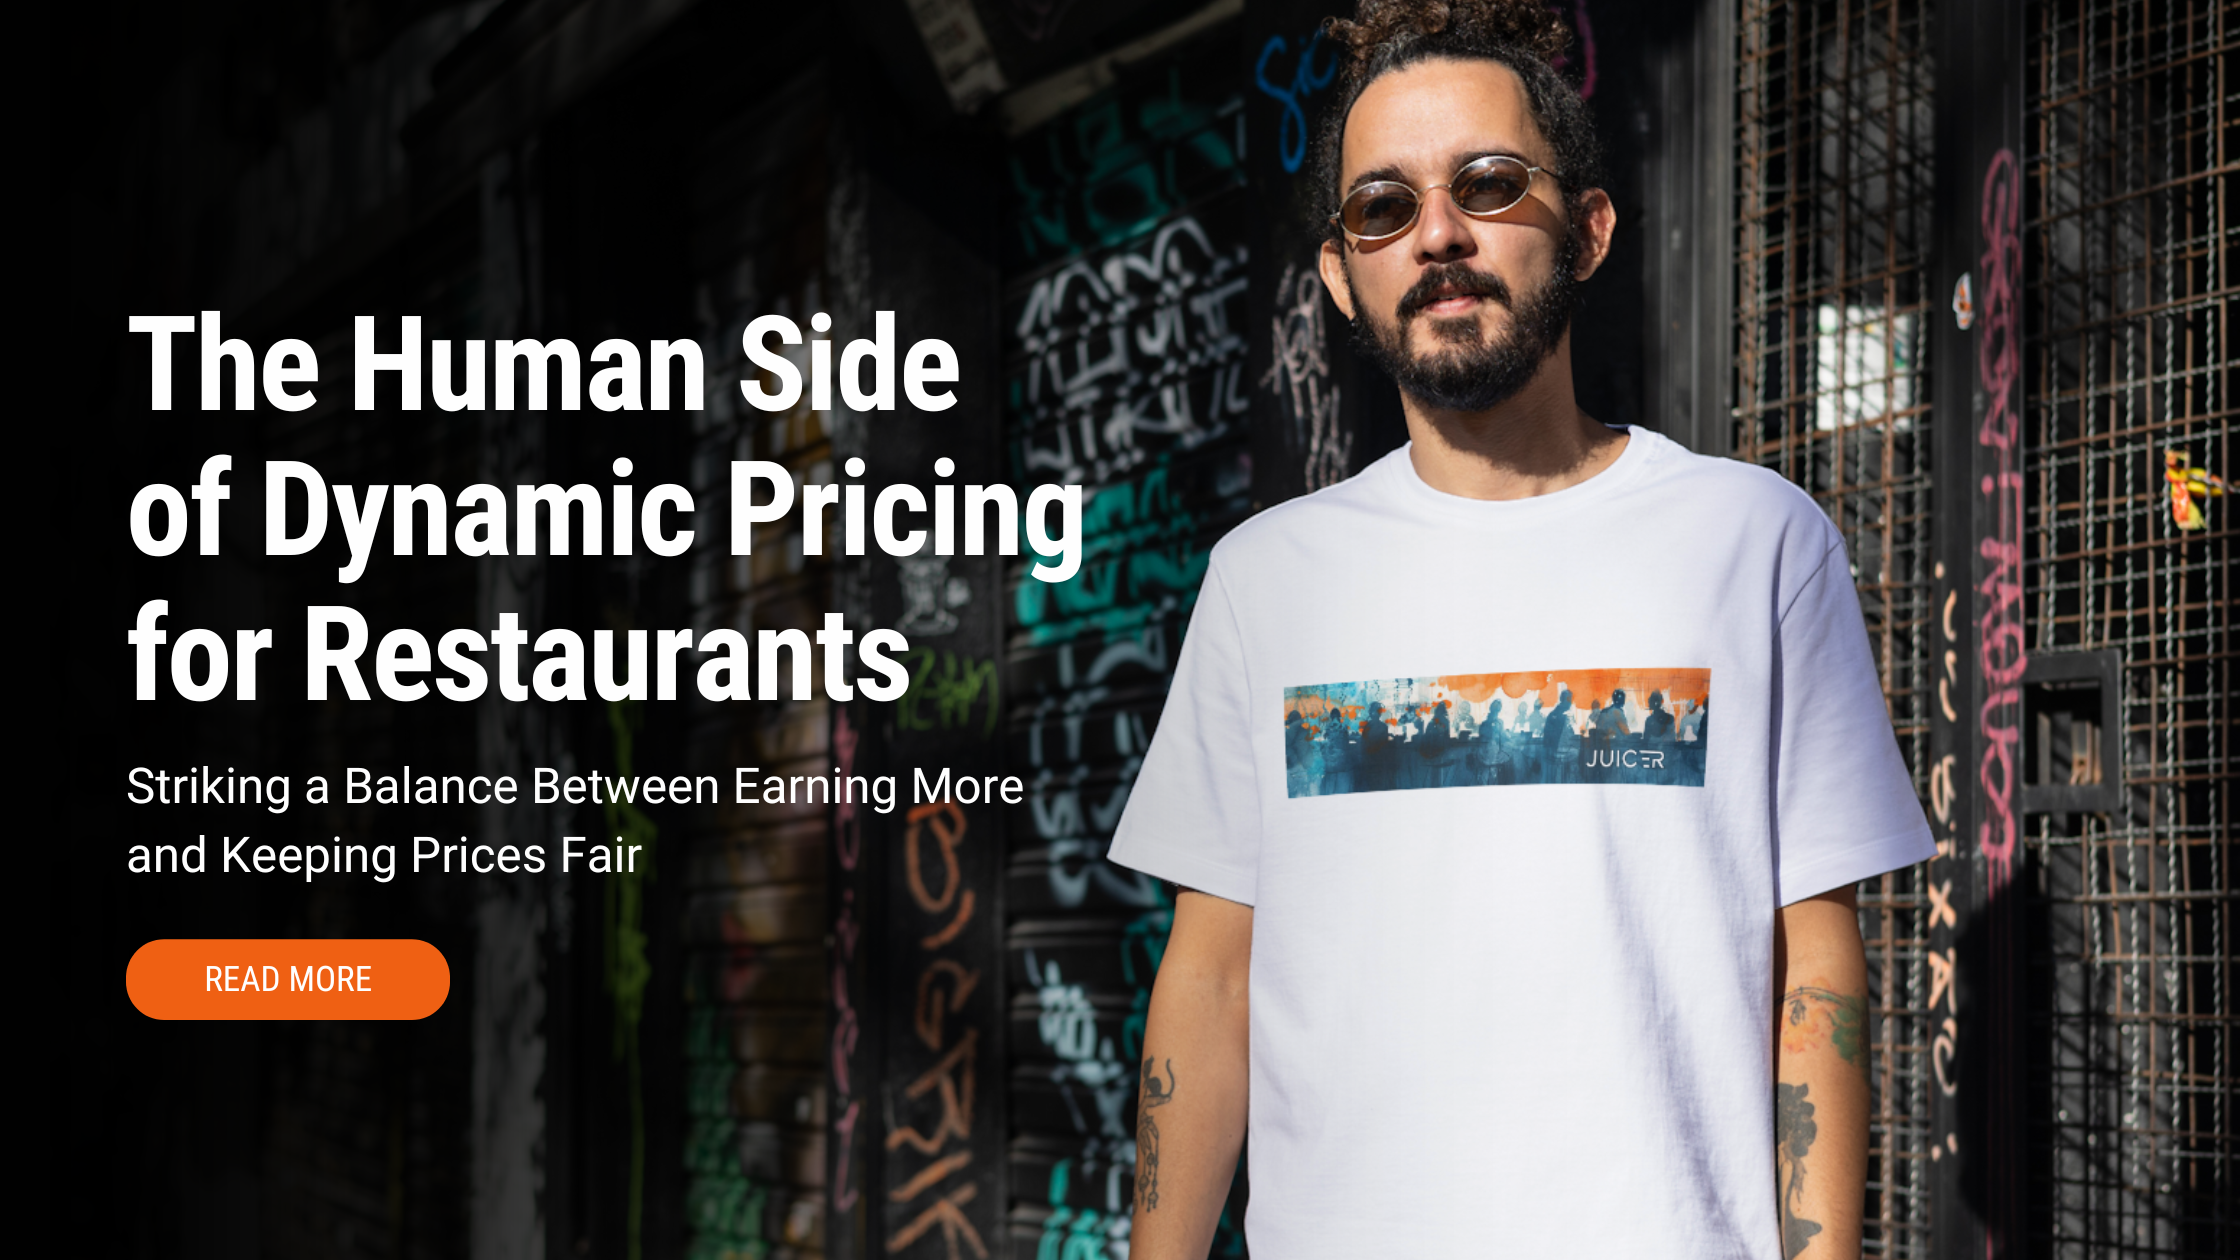 The Human Side of Dynamic Pricing for Restaurants